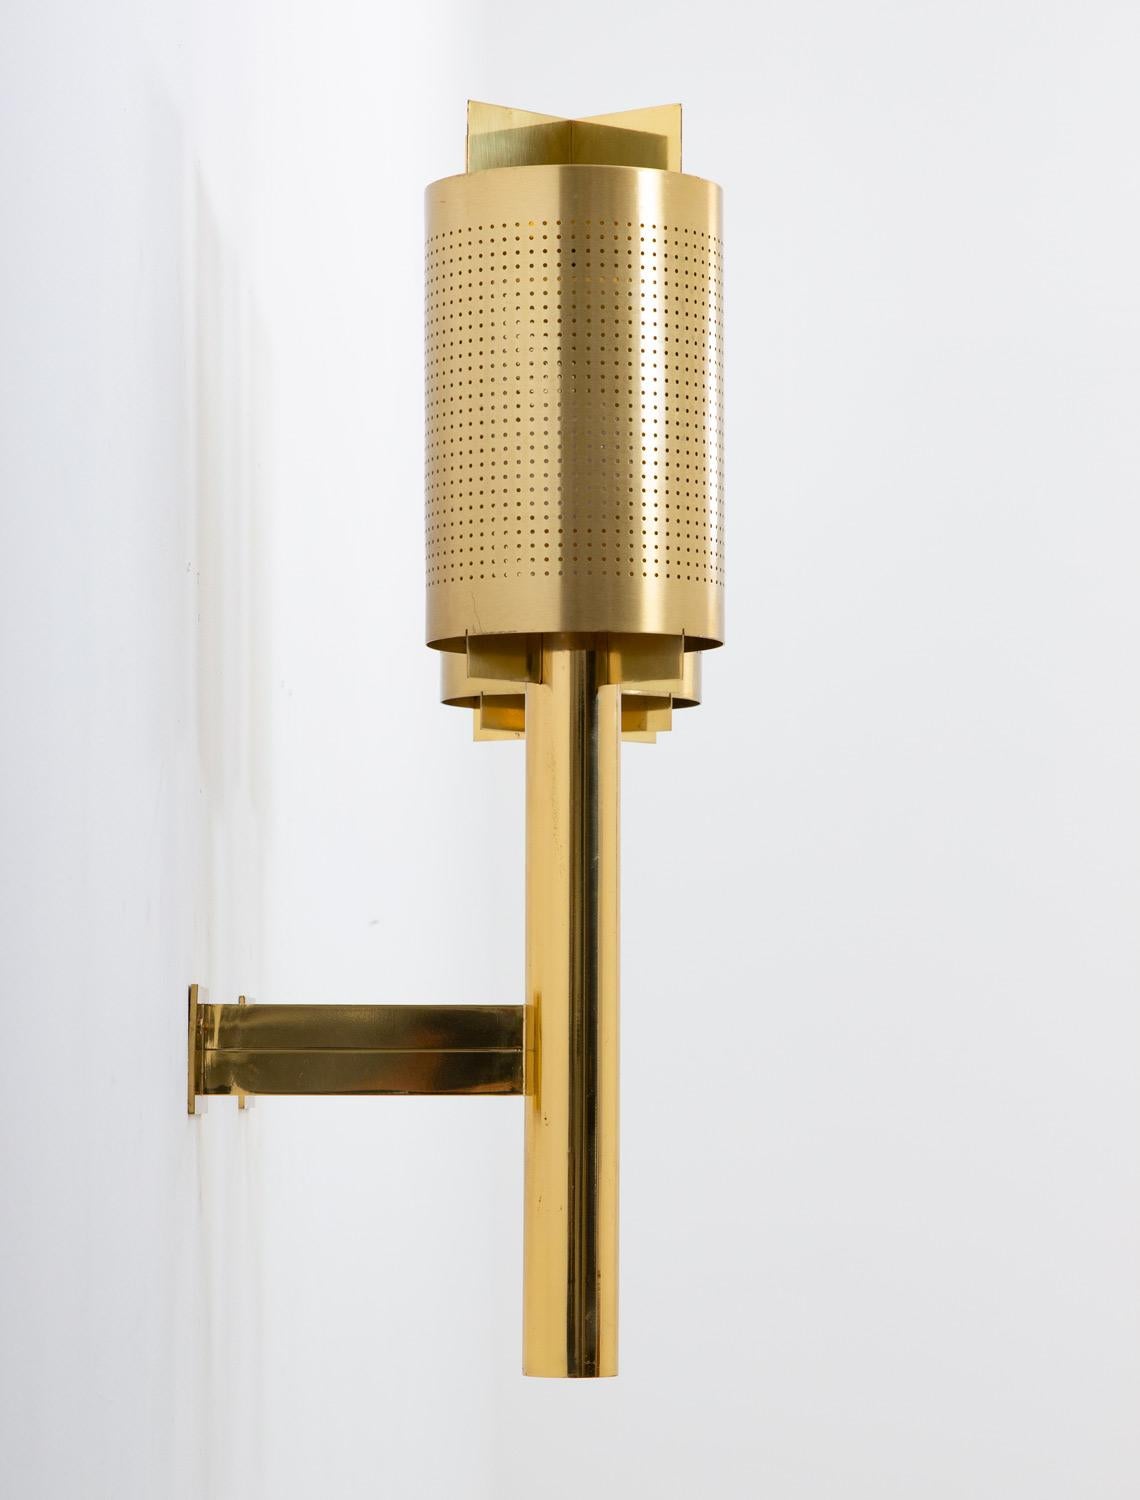 Large Midcentury Scandinavian Wall Sconces in Perforated Brass In Good Condition For Sale In Karlstad, SE